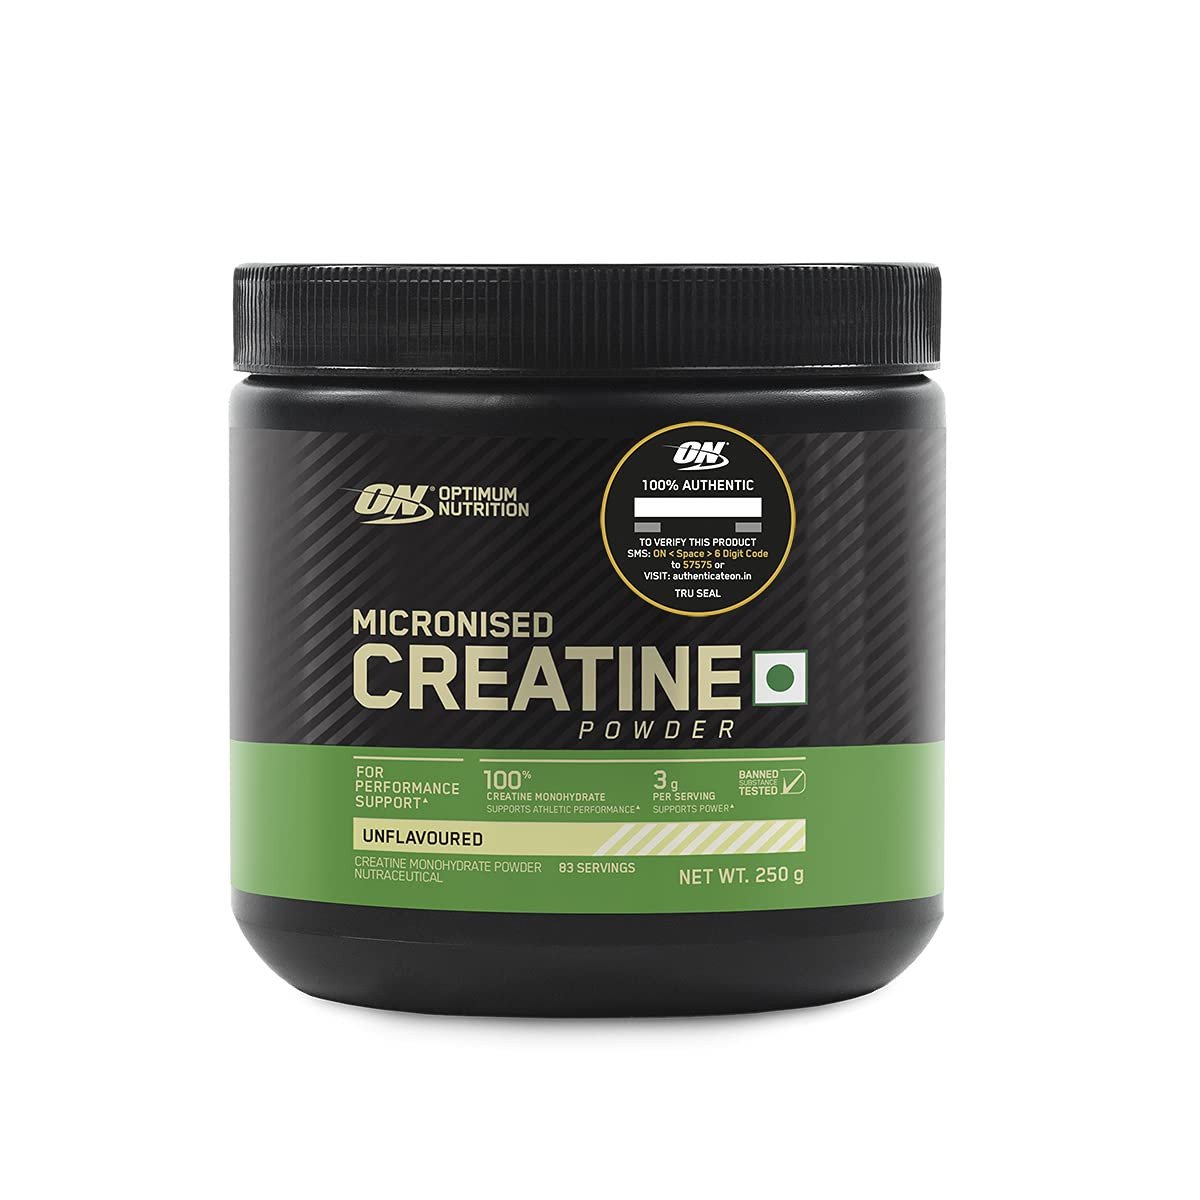 Optimum Nutrition (ON) Micronized Creatine Powder - 250 Gram, 83 Servings, Unflavored, 3g of 100% Creatine Monohydrate per serving, Supports Athletic Performance & Power